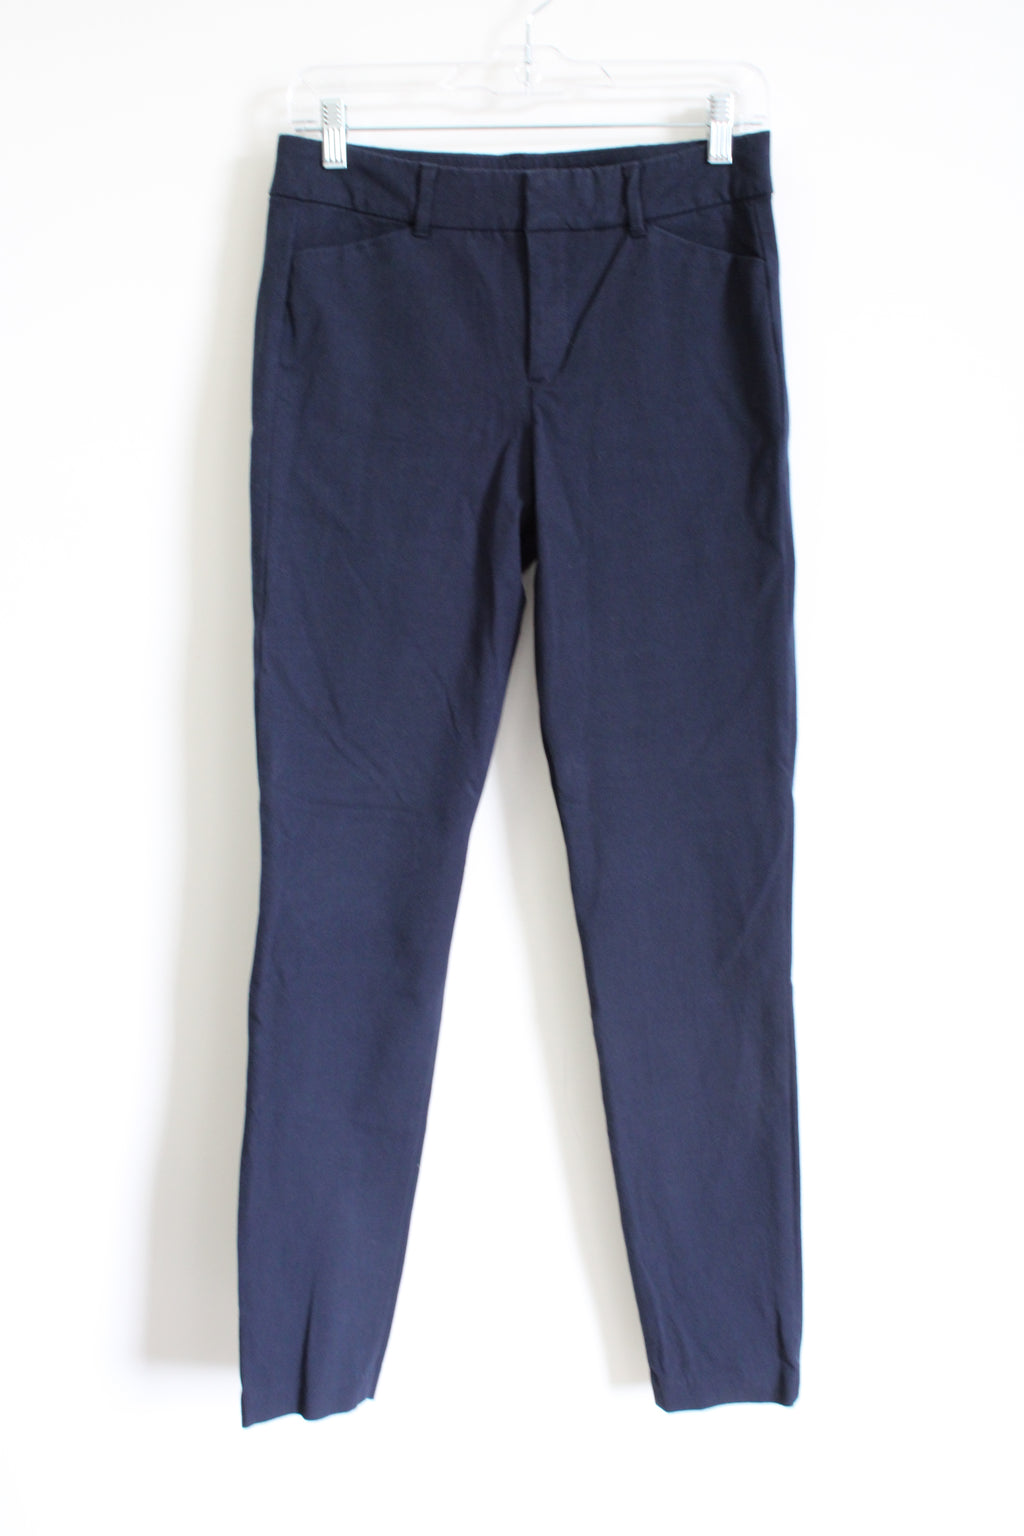 Old Navy Mid Rise Slim Pixie Navy Blue Pant | 4 Tall